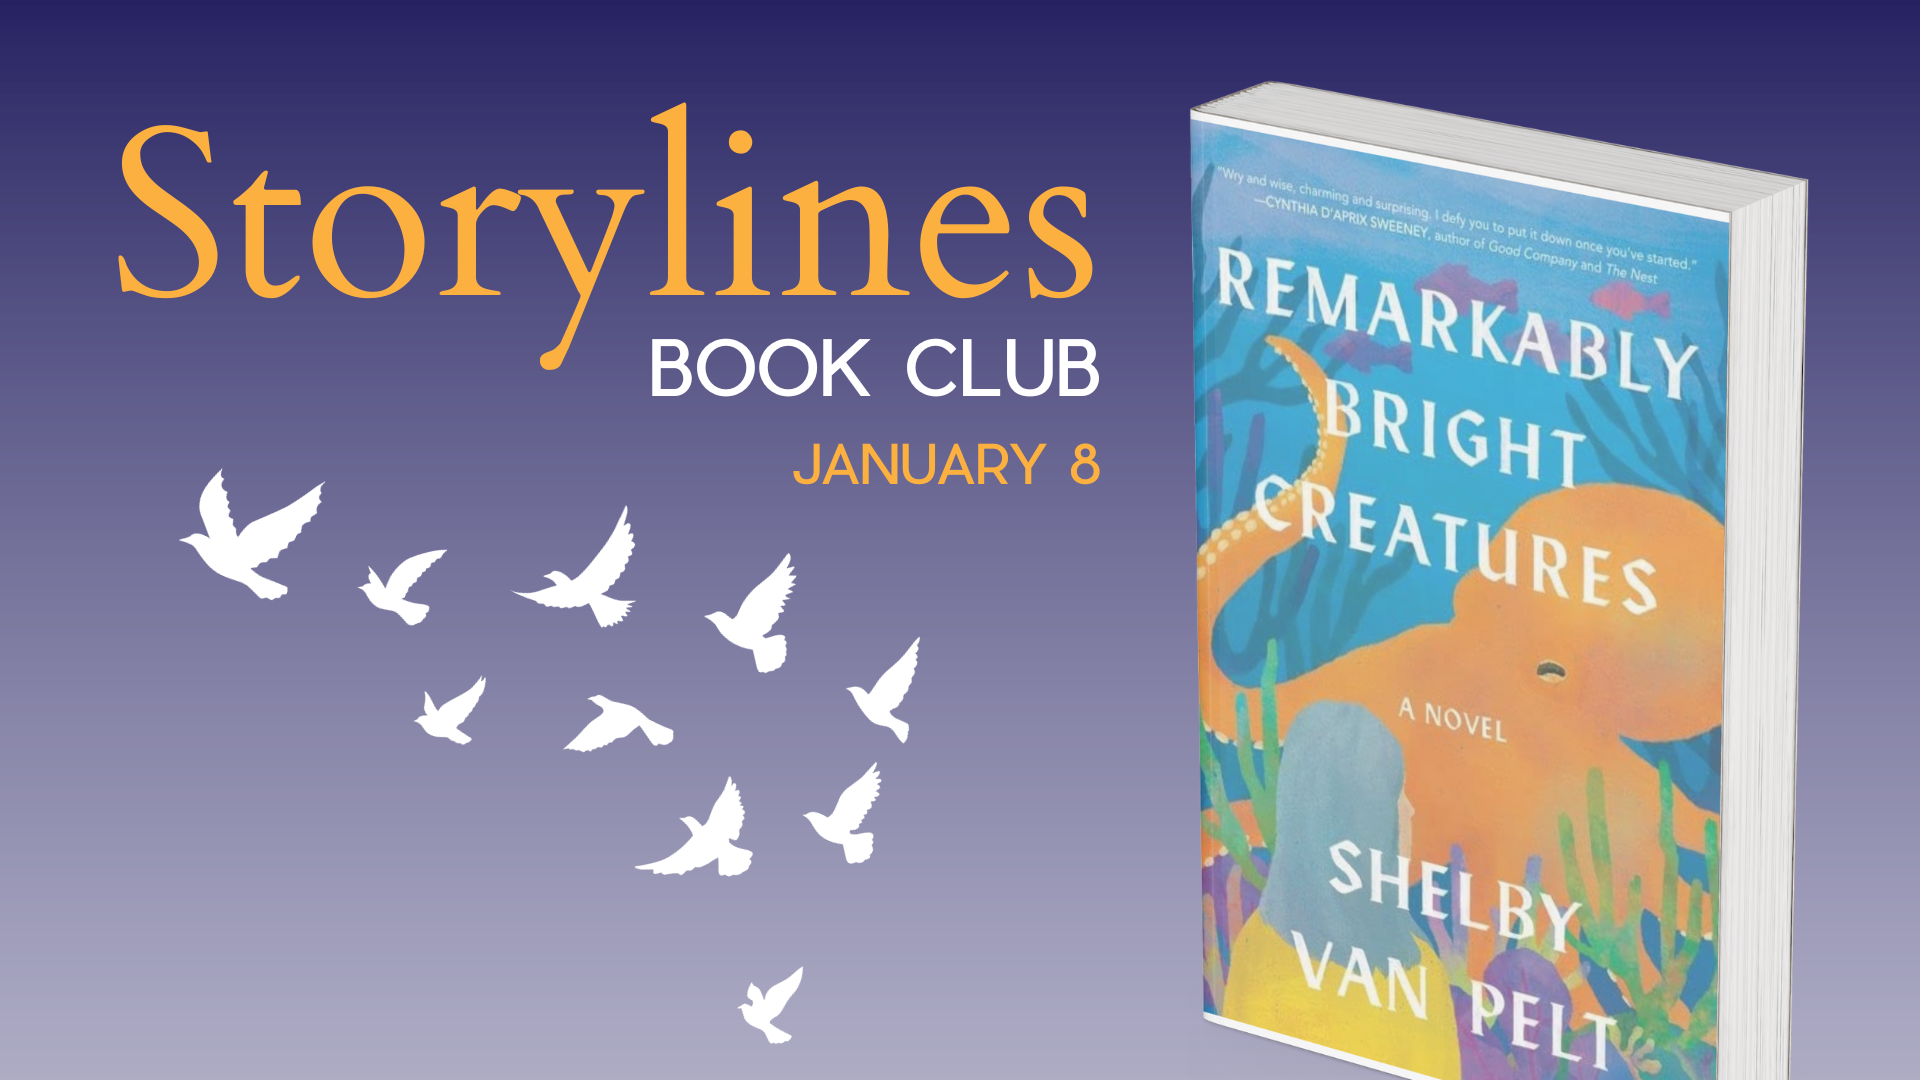 Storylines Book Club - Remarkably Bright Creatures Jan 8, 2024